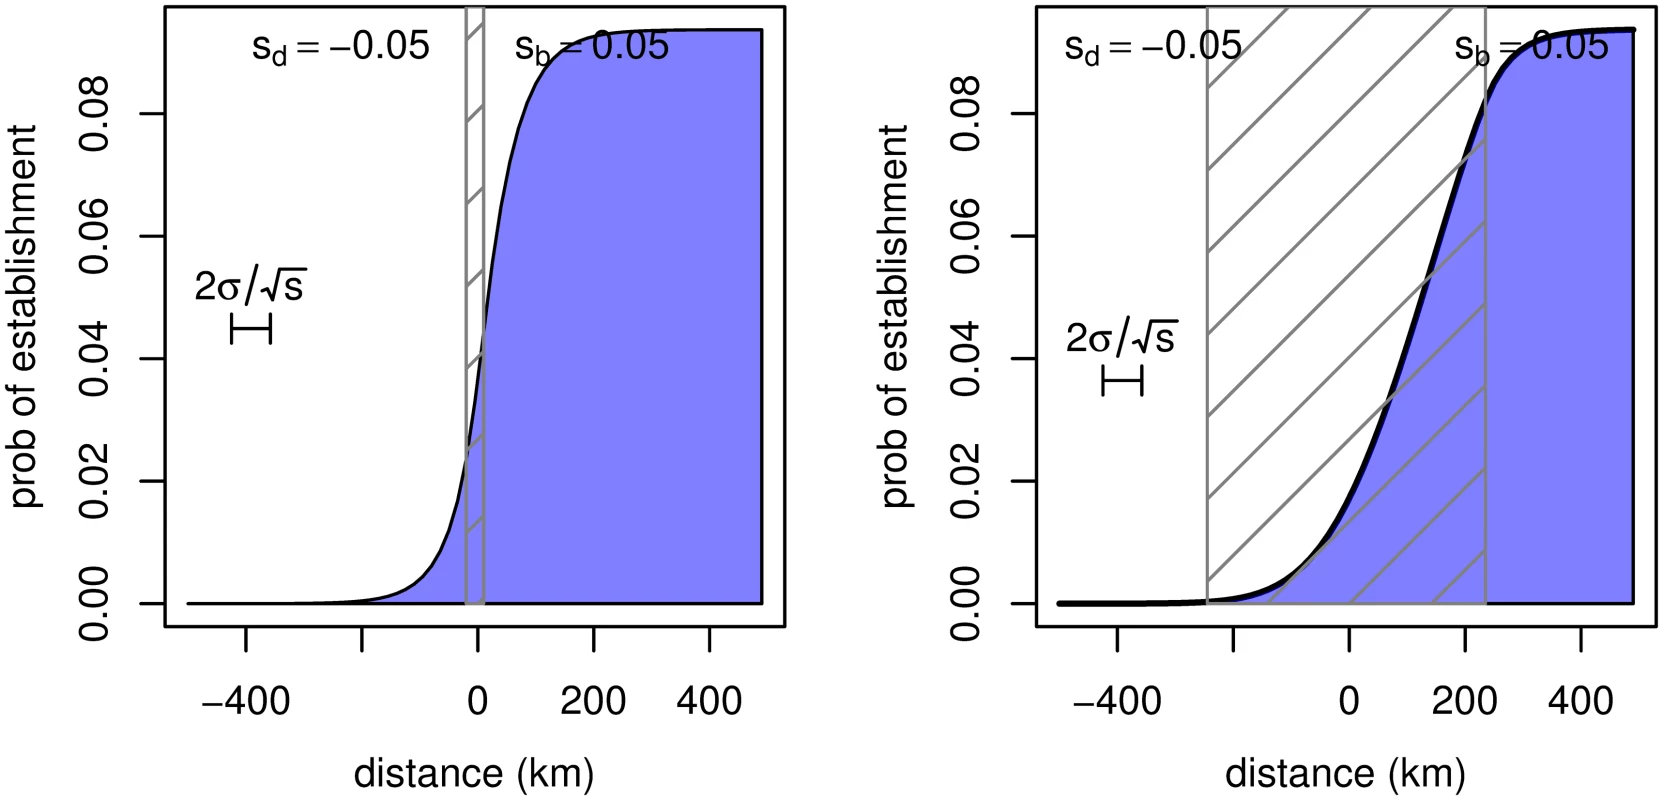 The probability of establishment of a new mutant allele as a function of distance from the edge of the region where it is beneficial, in an abrupt transition (left) and a gradual transition (right).